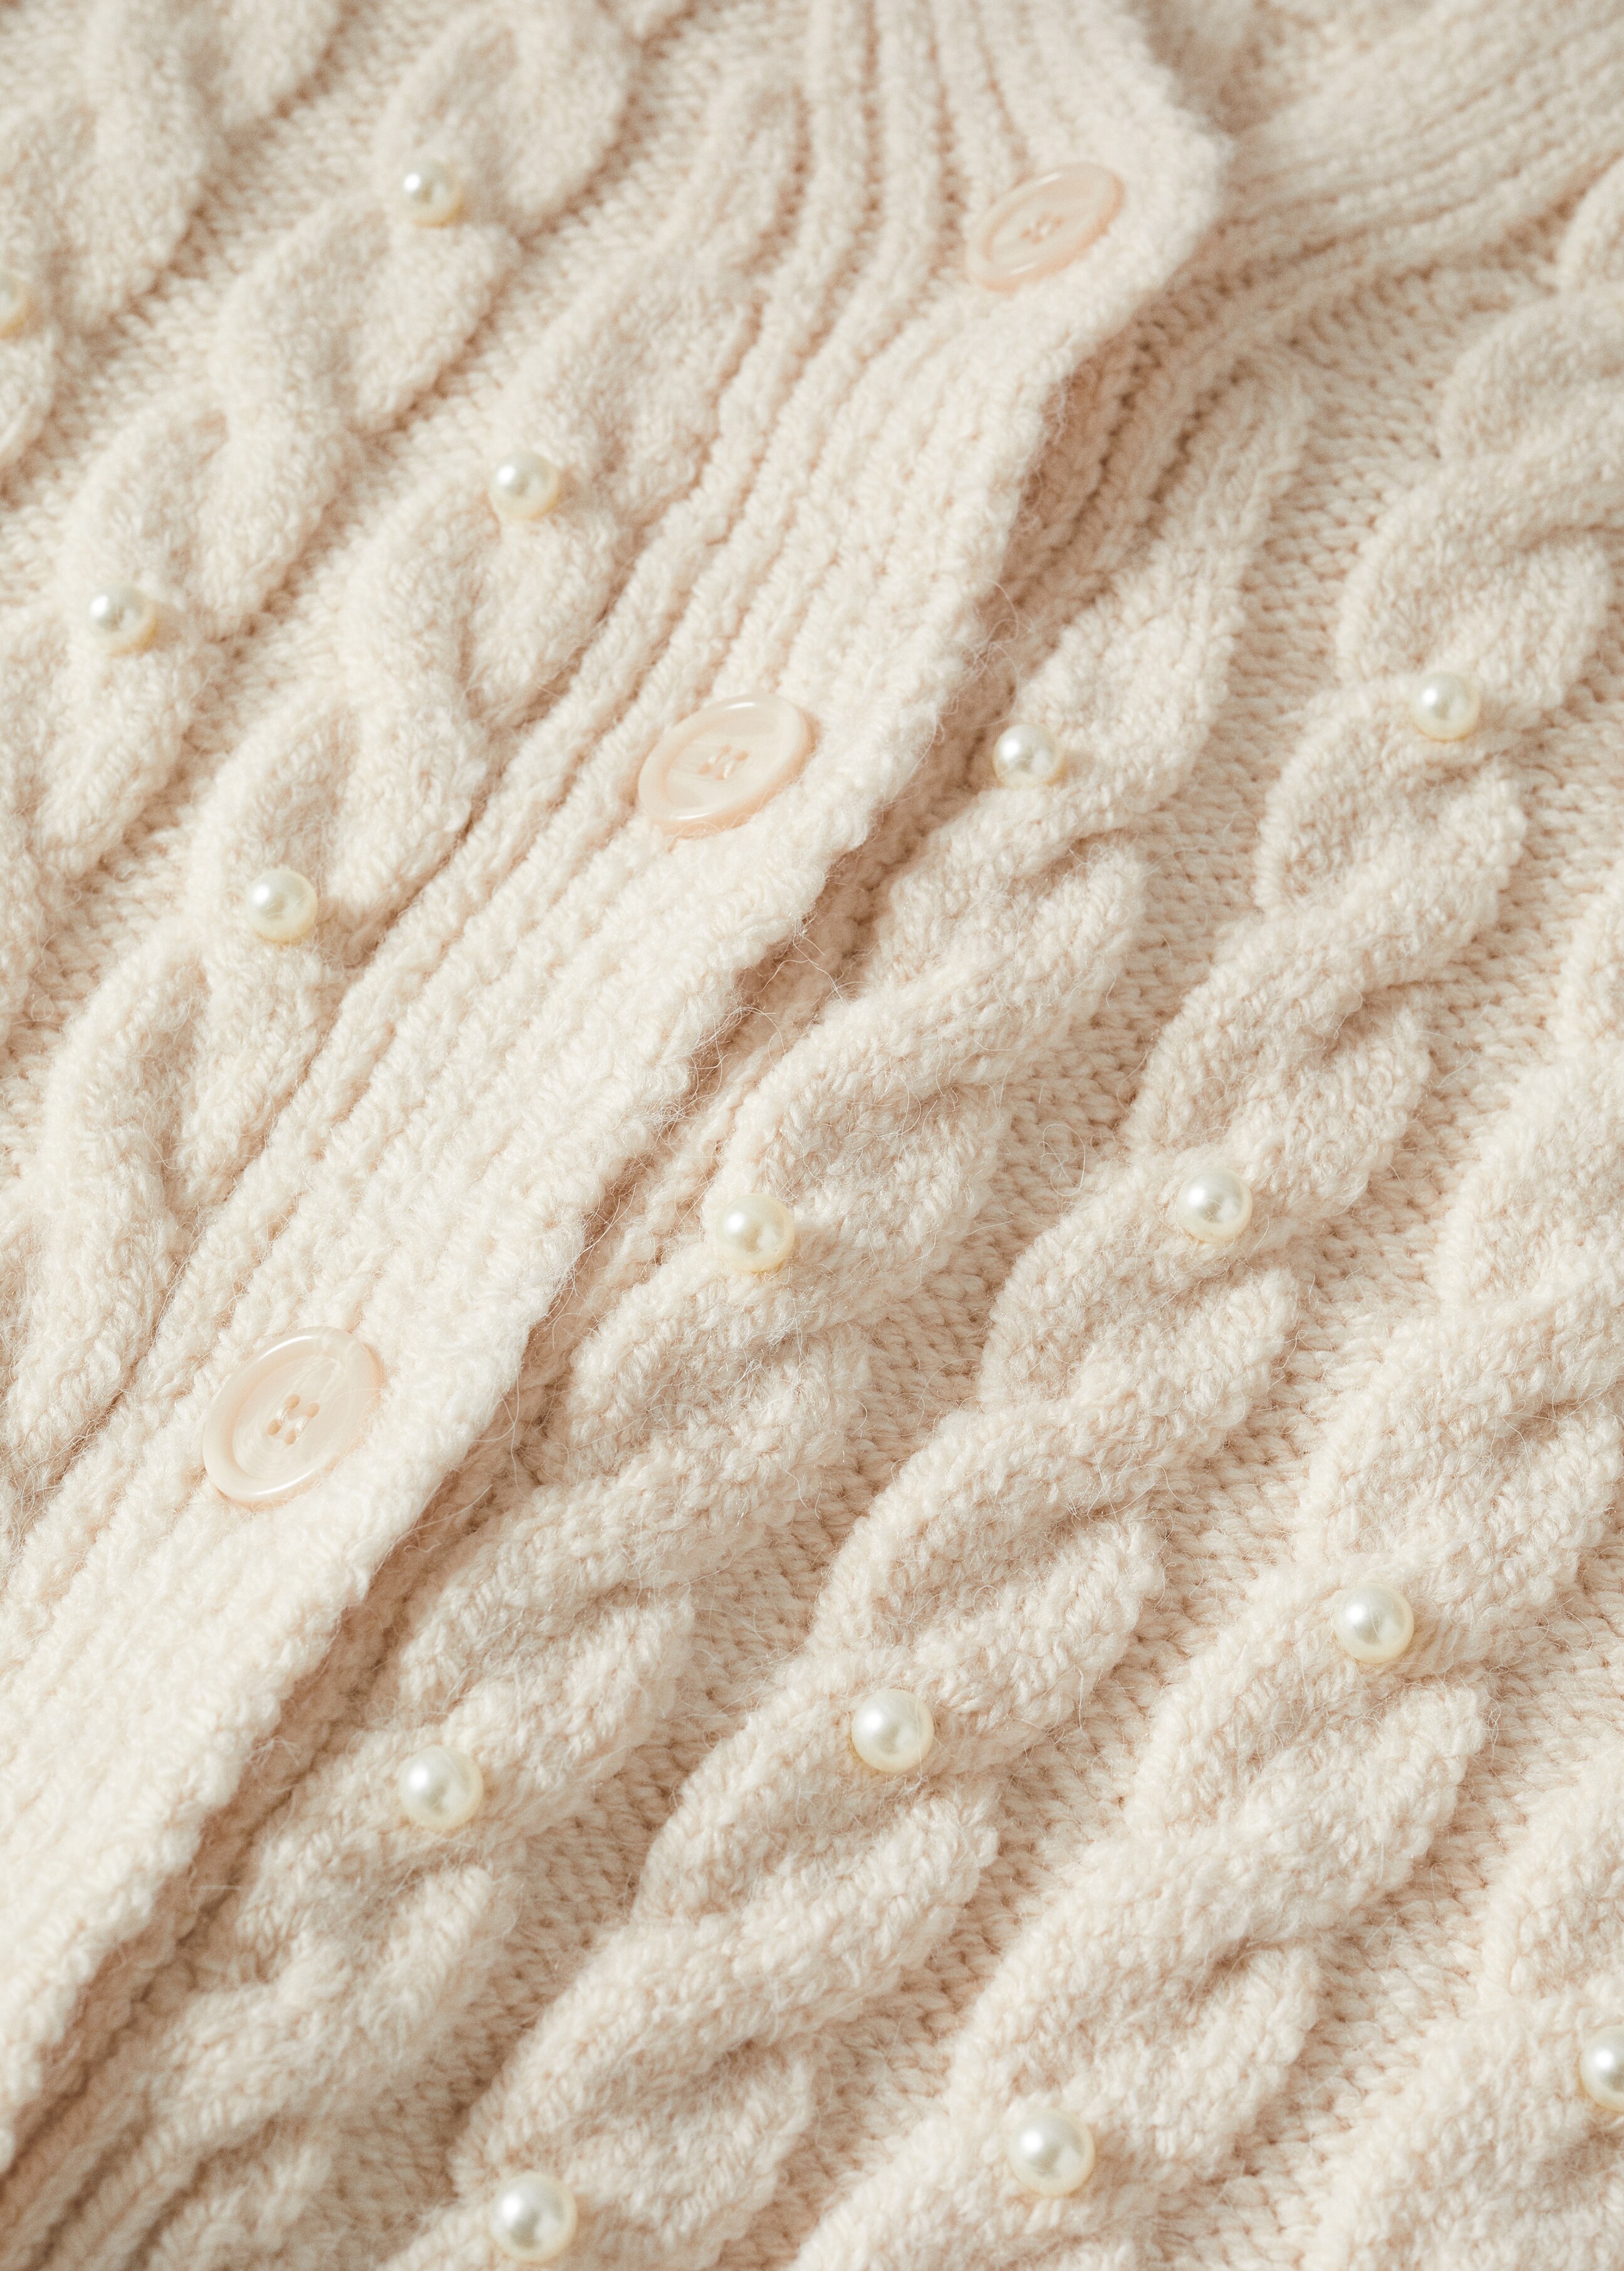 Knitted cardigan with pearls - Details of the article 8